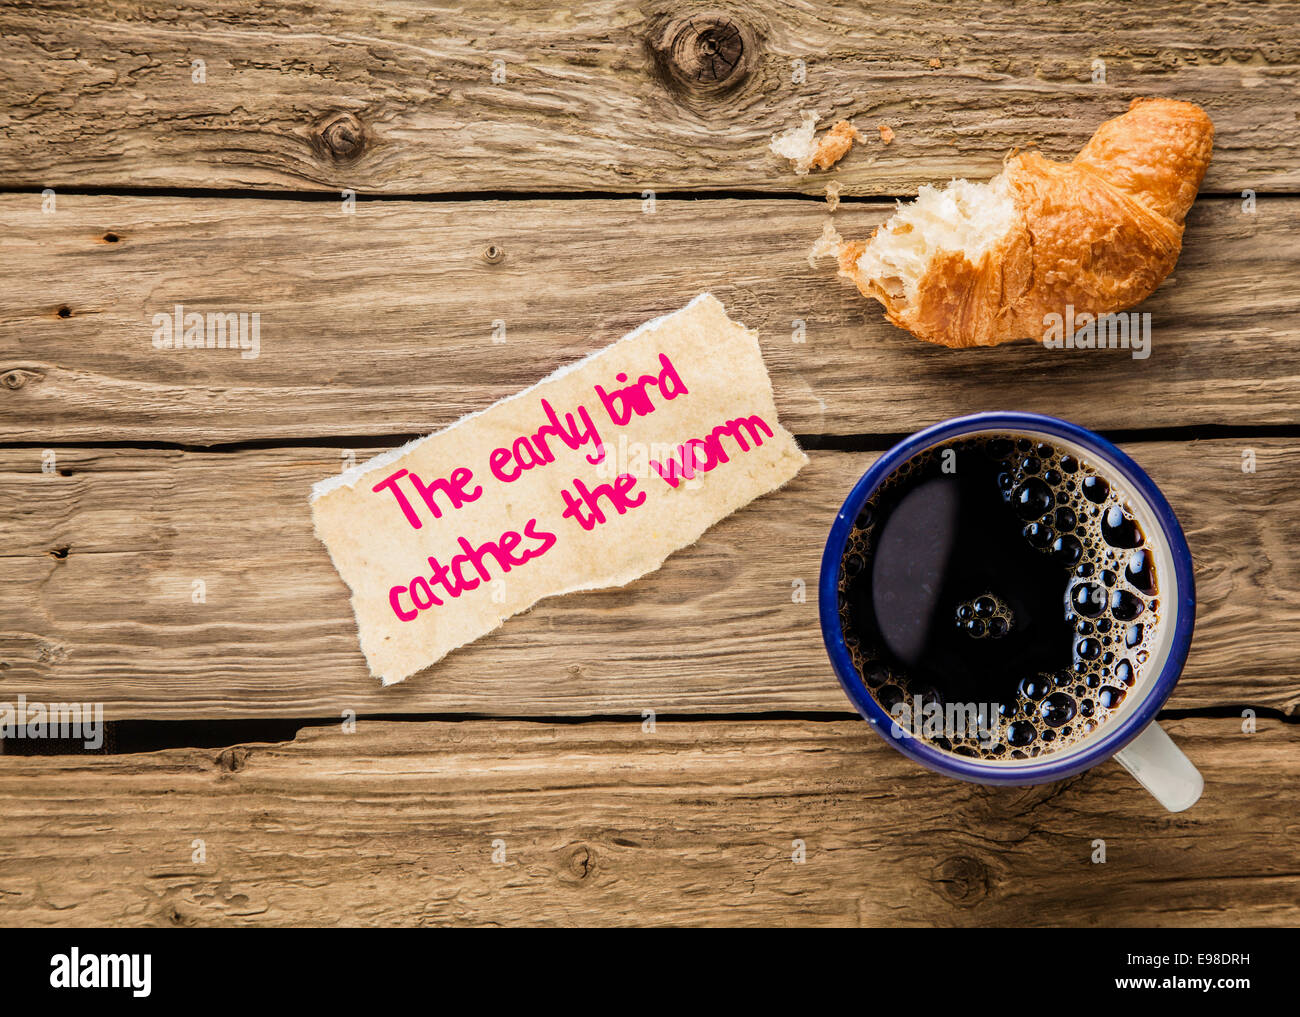 The early bird catches the worm, an inspirational saying hand written on a small torn piece of paper alongside an early breakfast of frothy espresso coffee and a half devoured fresh golden croissant Stock Photo